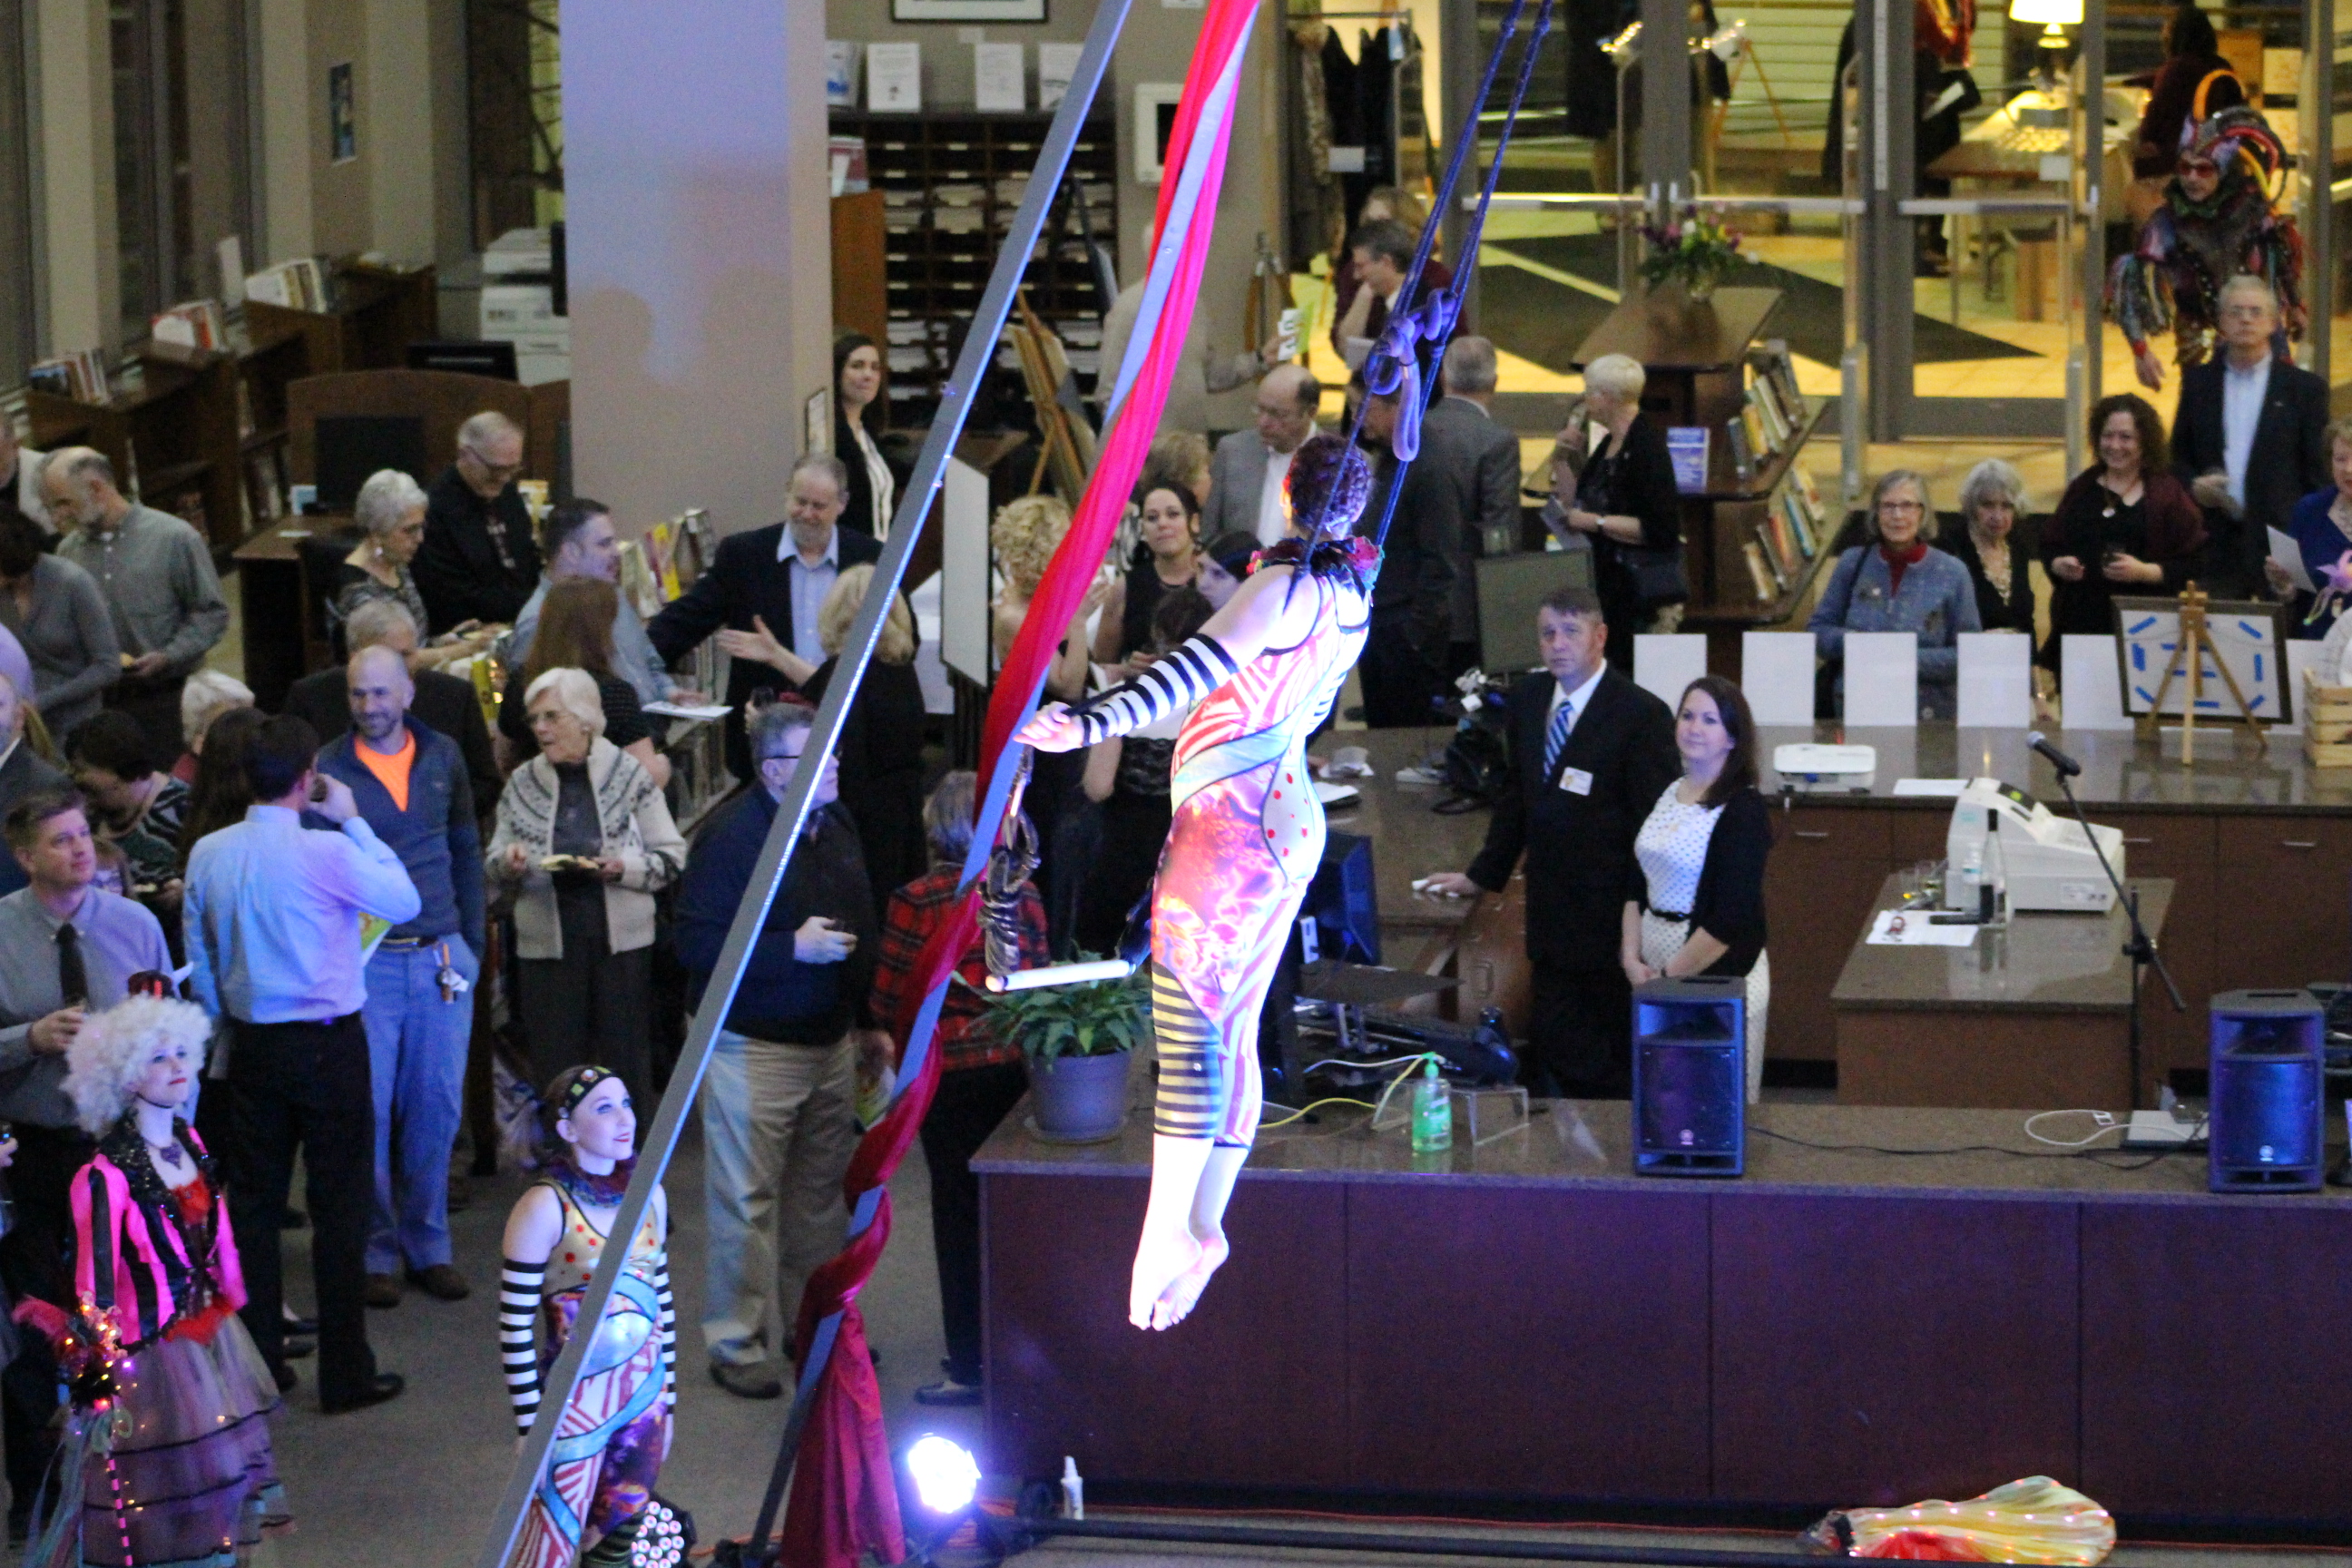 Aerial performer in front of crowd